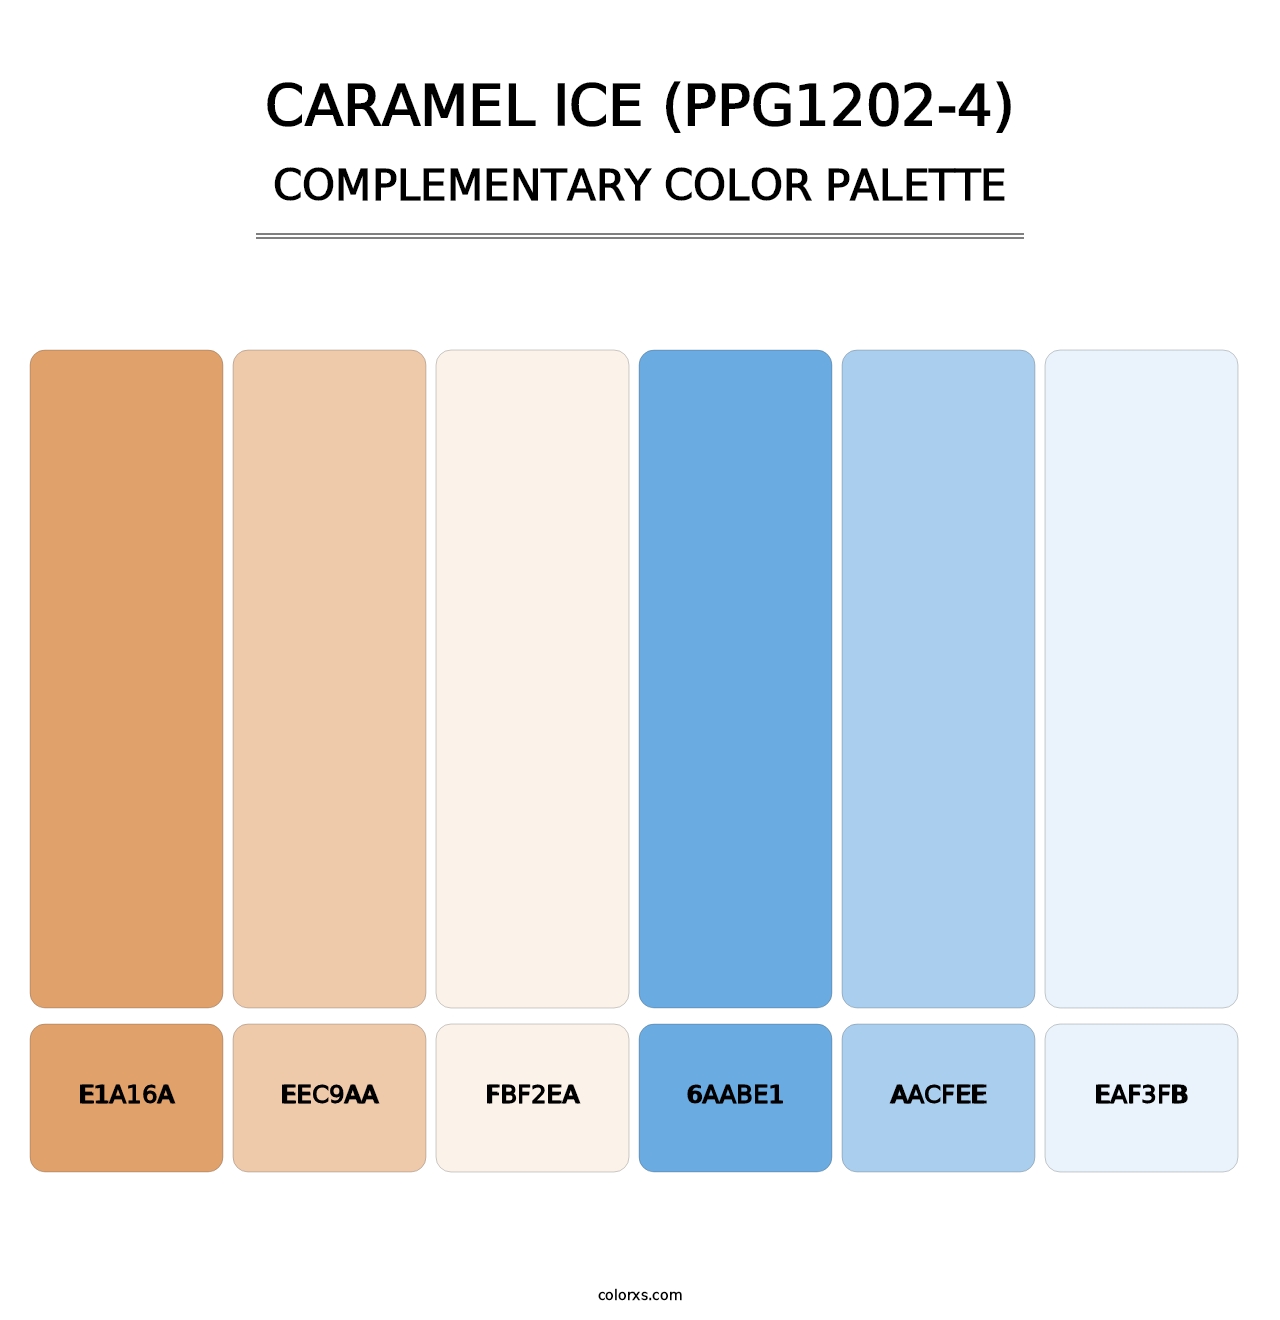 Caramel Ice (PPG1202-4) - Complementary Color Palette